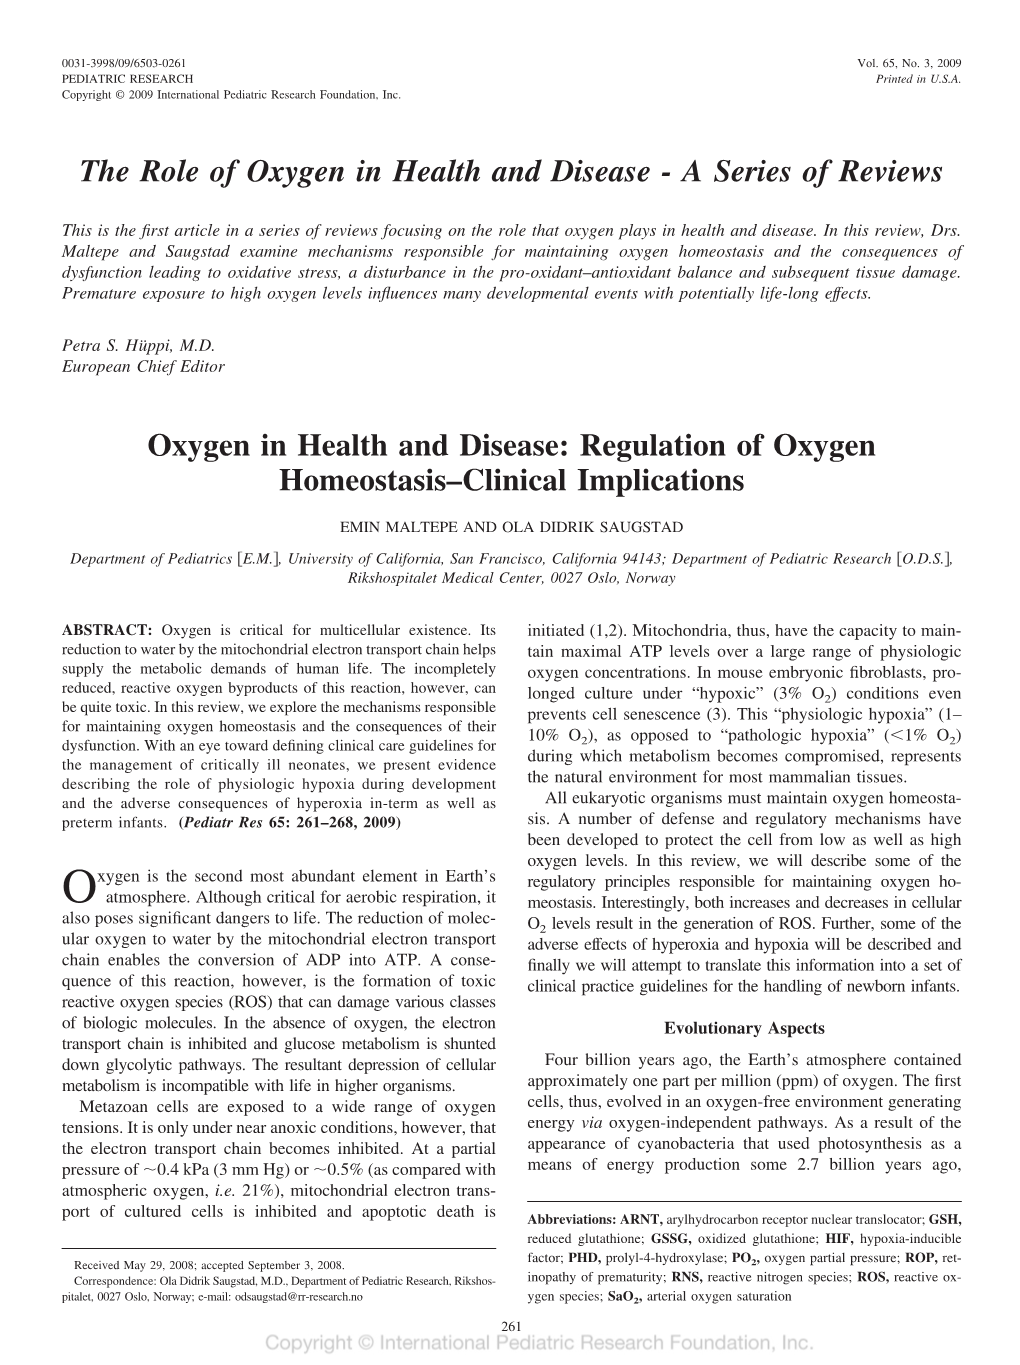 The Role of Oxygen in Health and Disease - a Series of Reviews